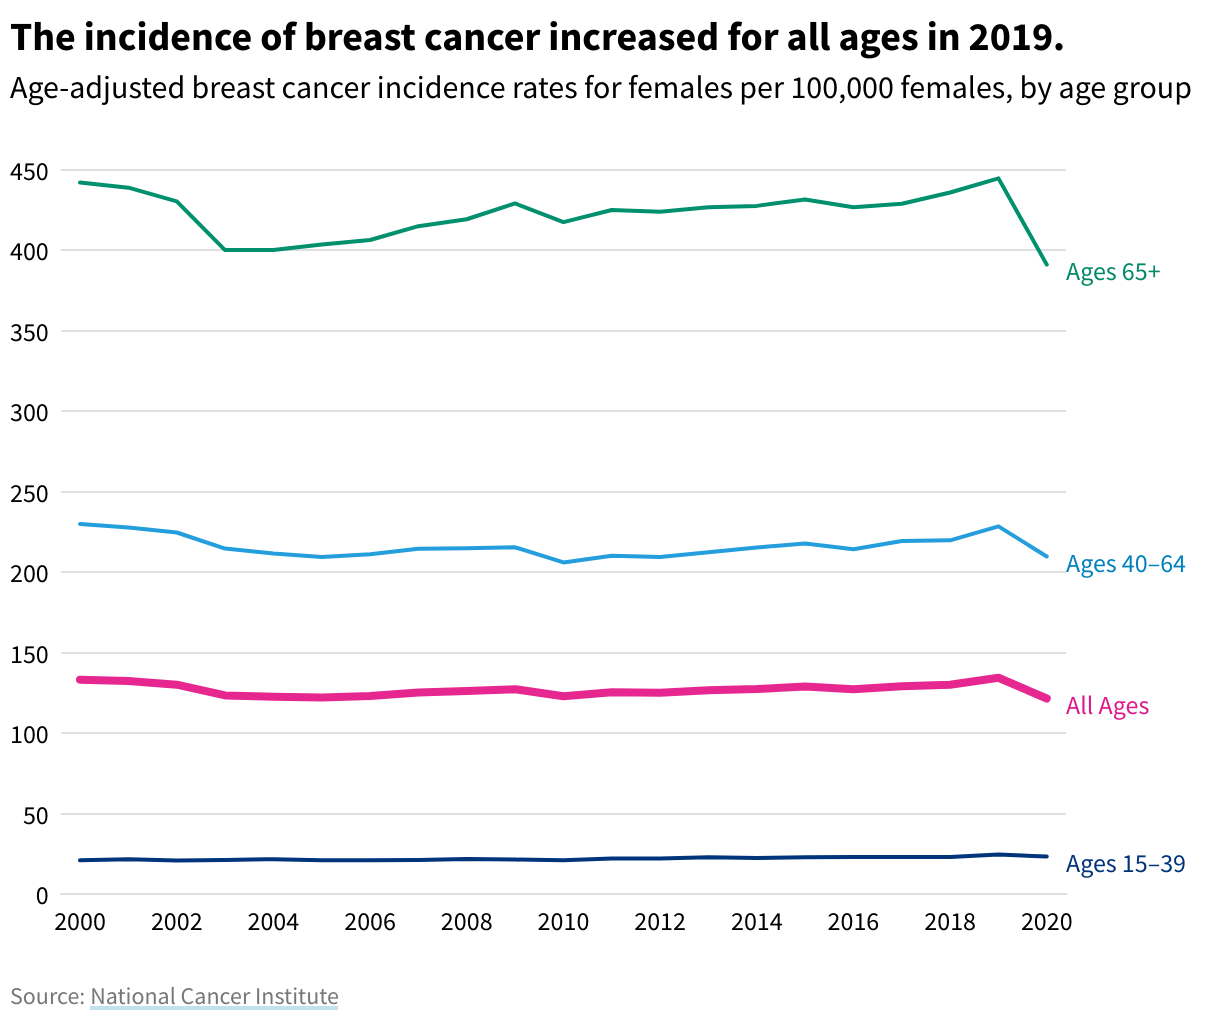 Line chart showing the breast cancer incidence rates for females, by age group, showing an increase for all groups in 2019.